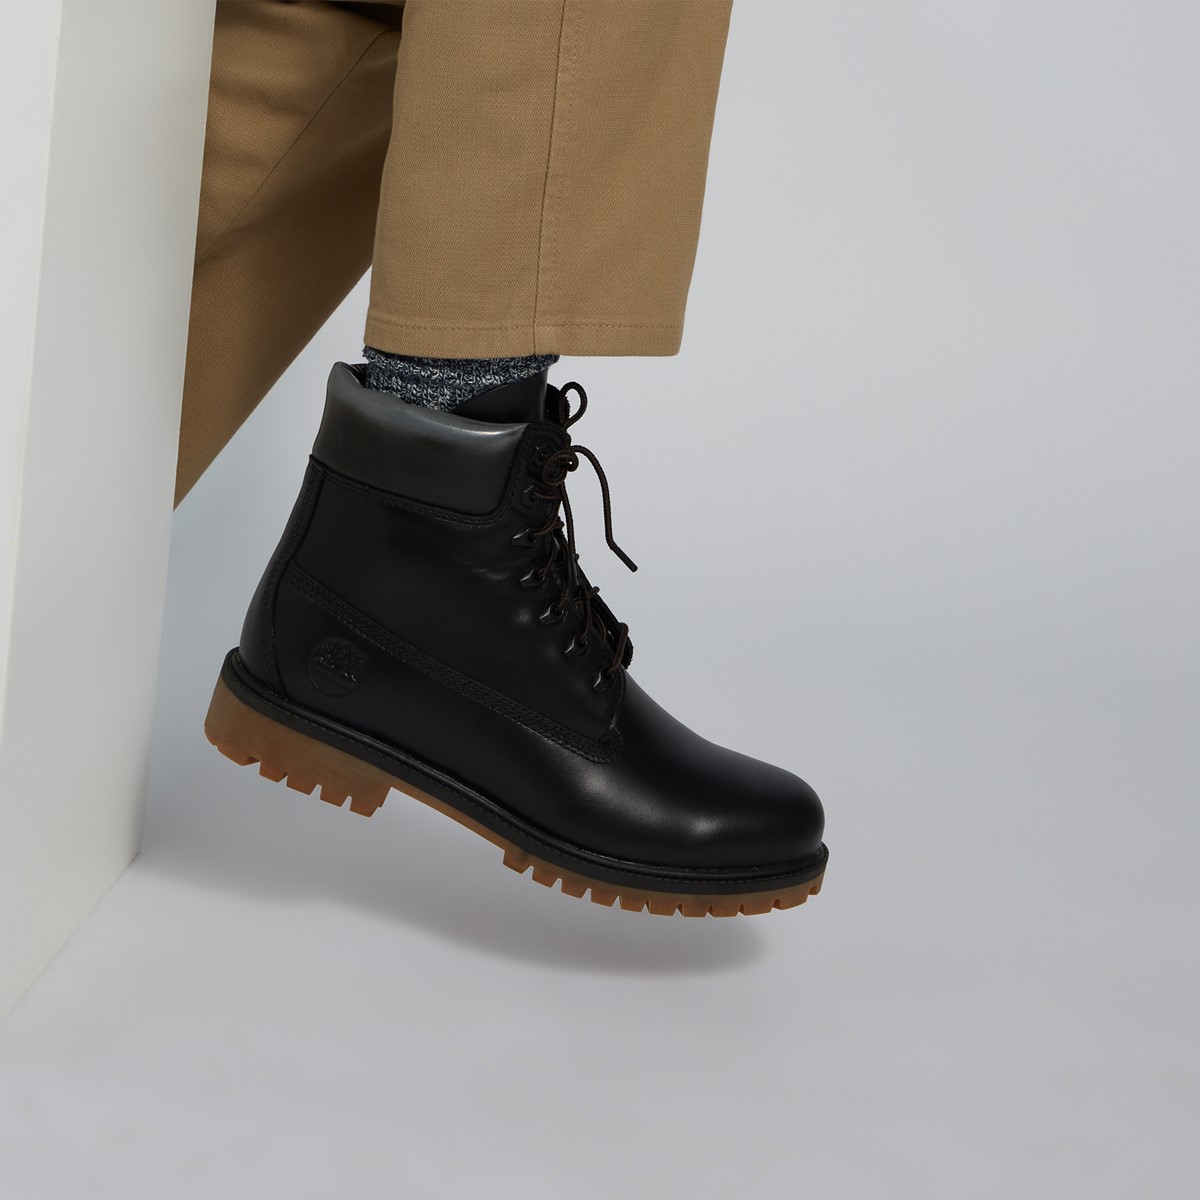 men's timberland heritage boots